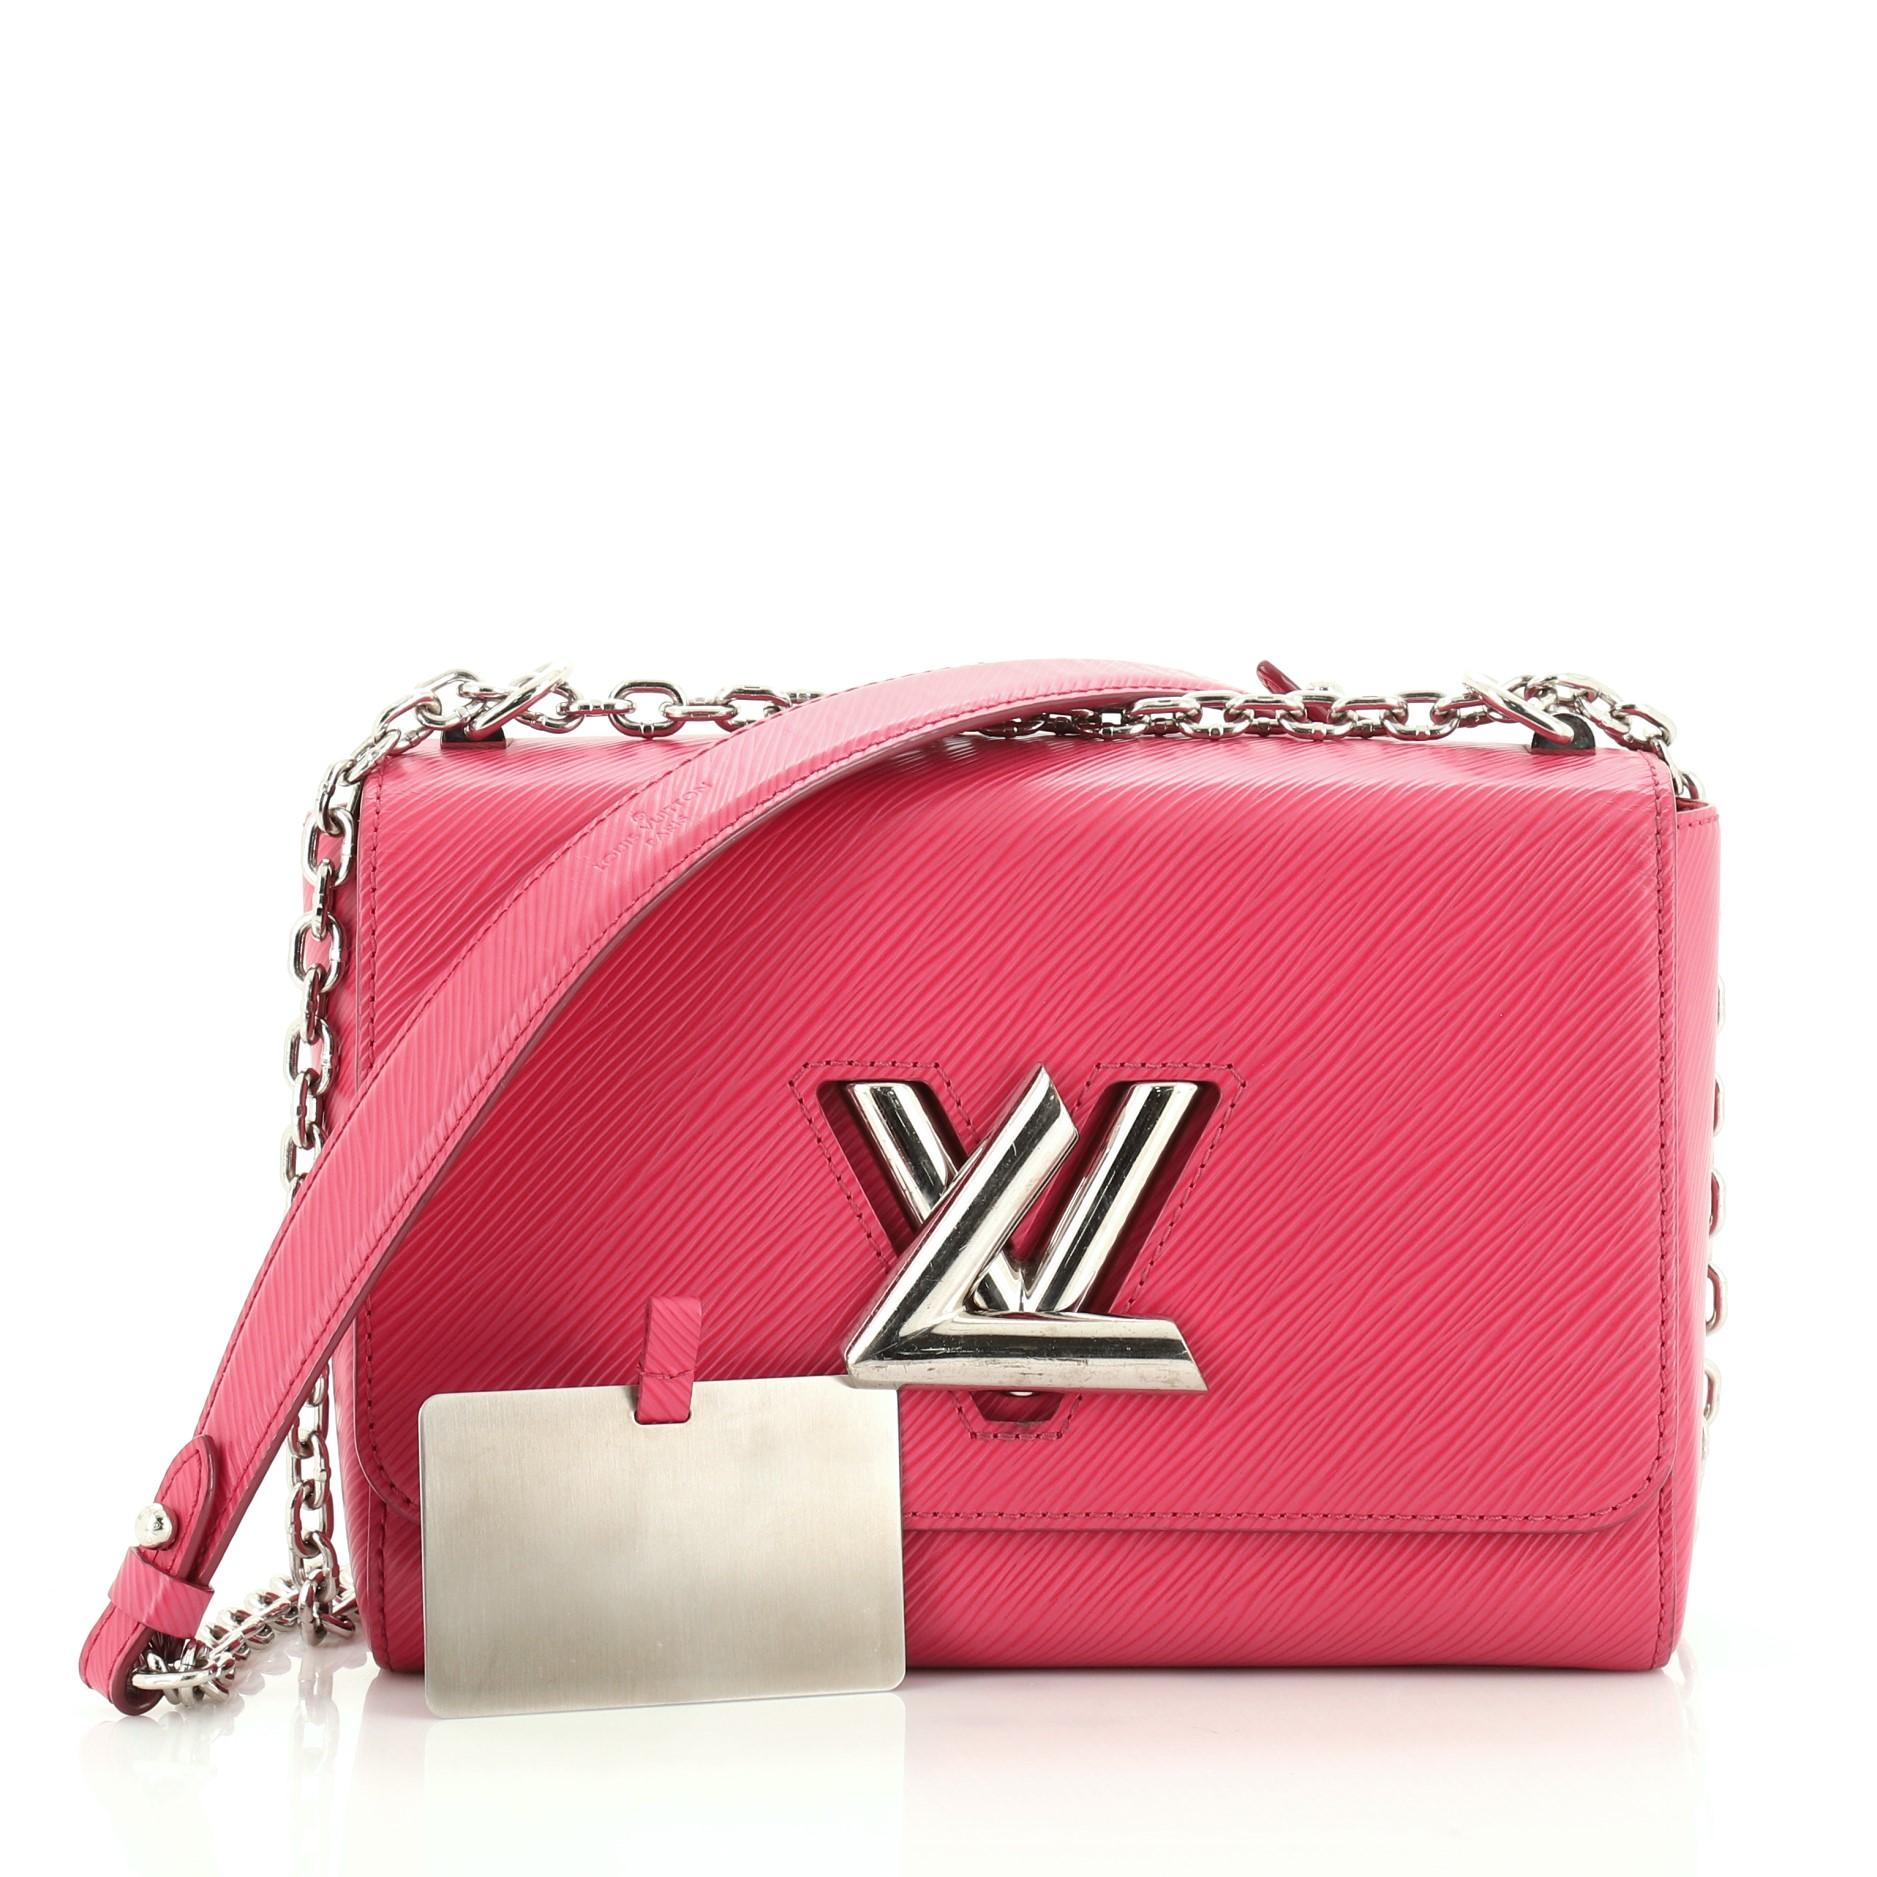 This Louis Vuitton Twist Handbag Epi Leather MM, crafted from pink epi leather, features chain link strap with leather pad, frontal flap, and silver-tone hardware. Its LV twist lock closure opens to a pink microfiber and leather interior with slip